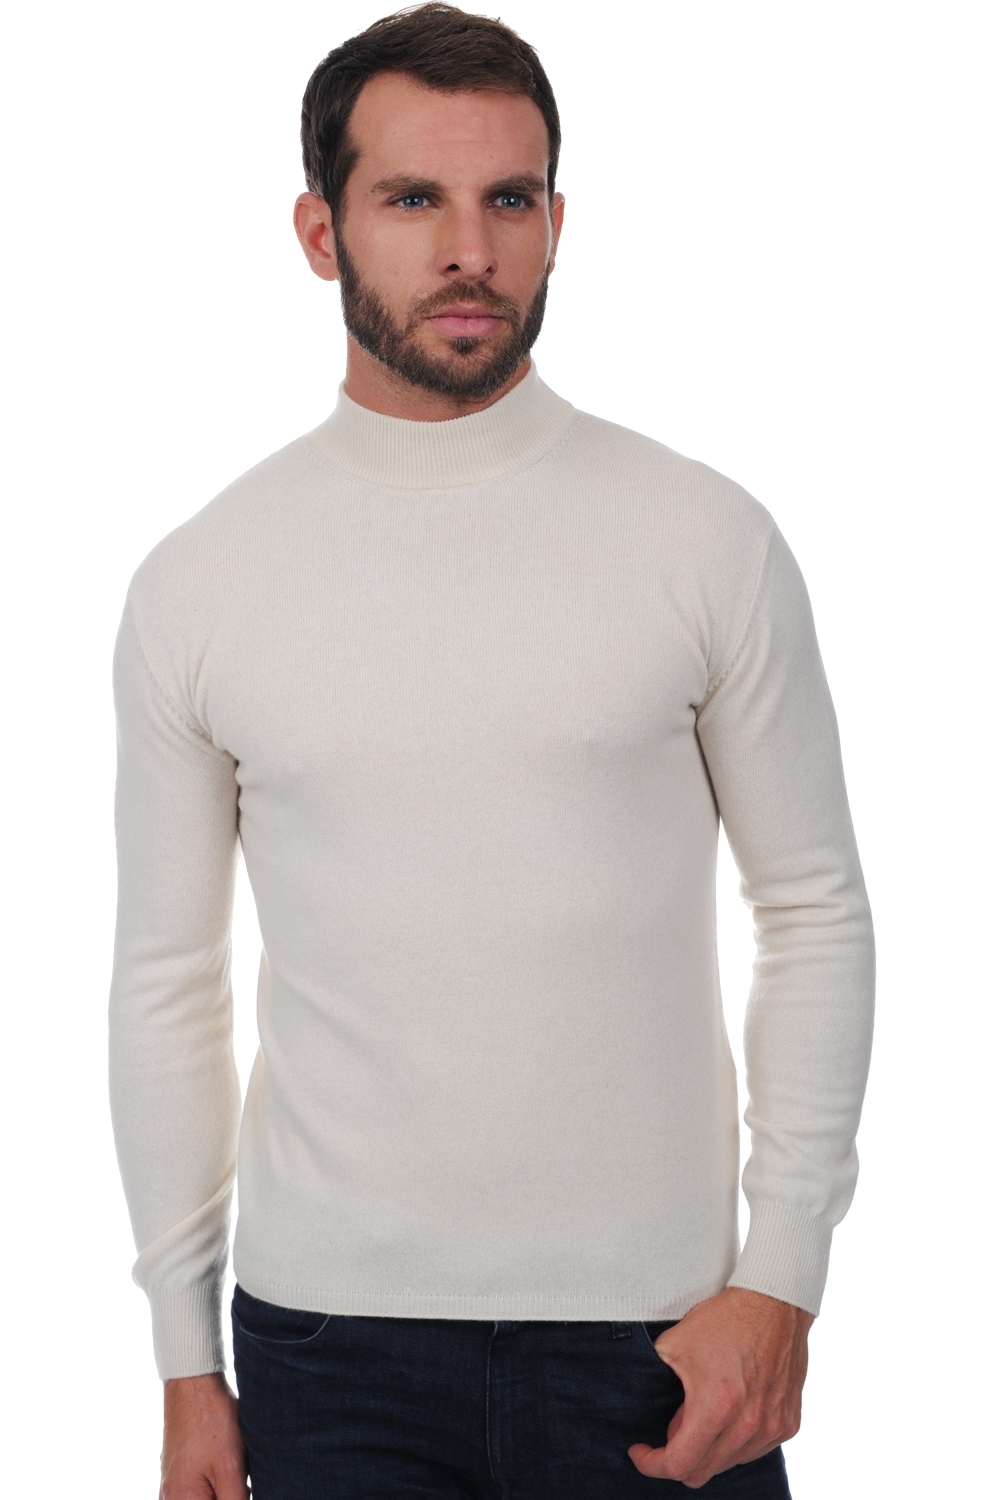 Cachemire pull homme frederic natural ecru m